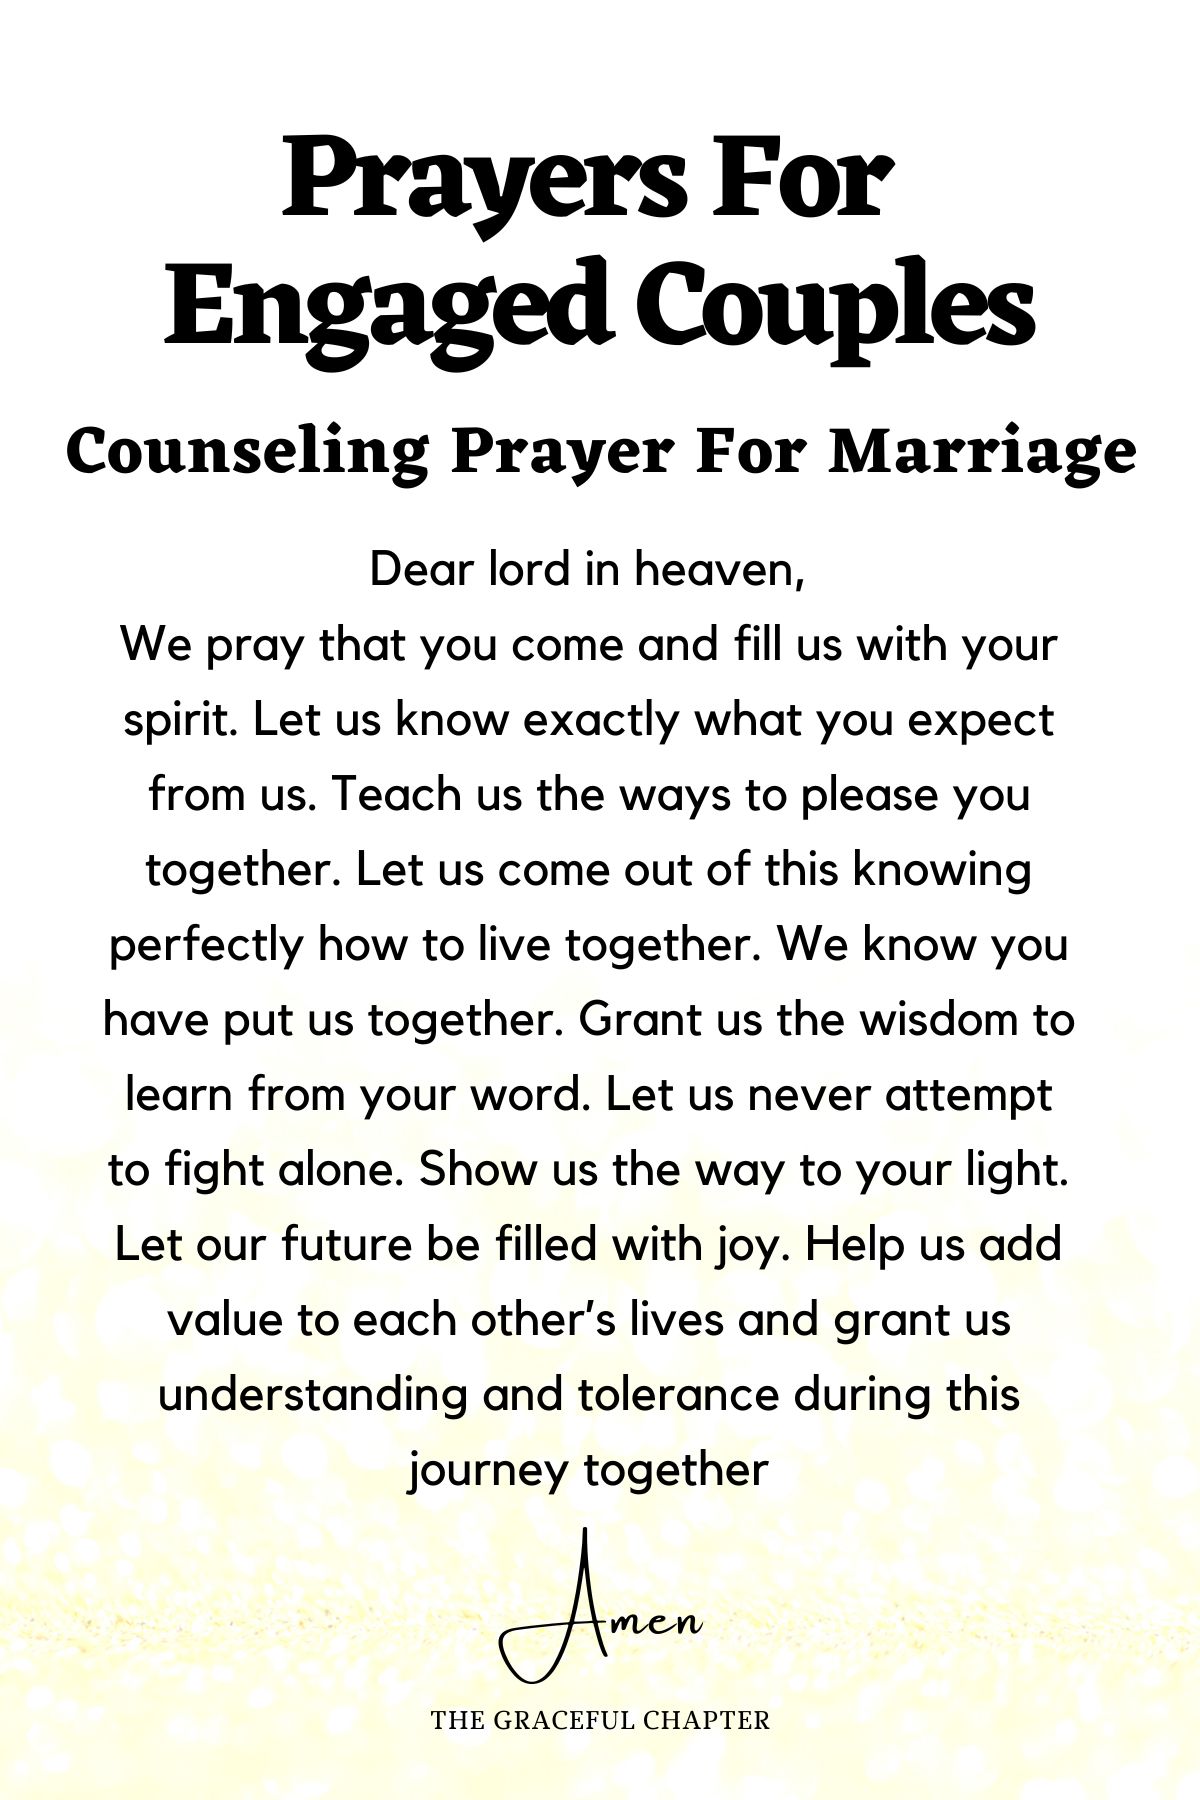  Counseling prayer for marriage